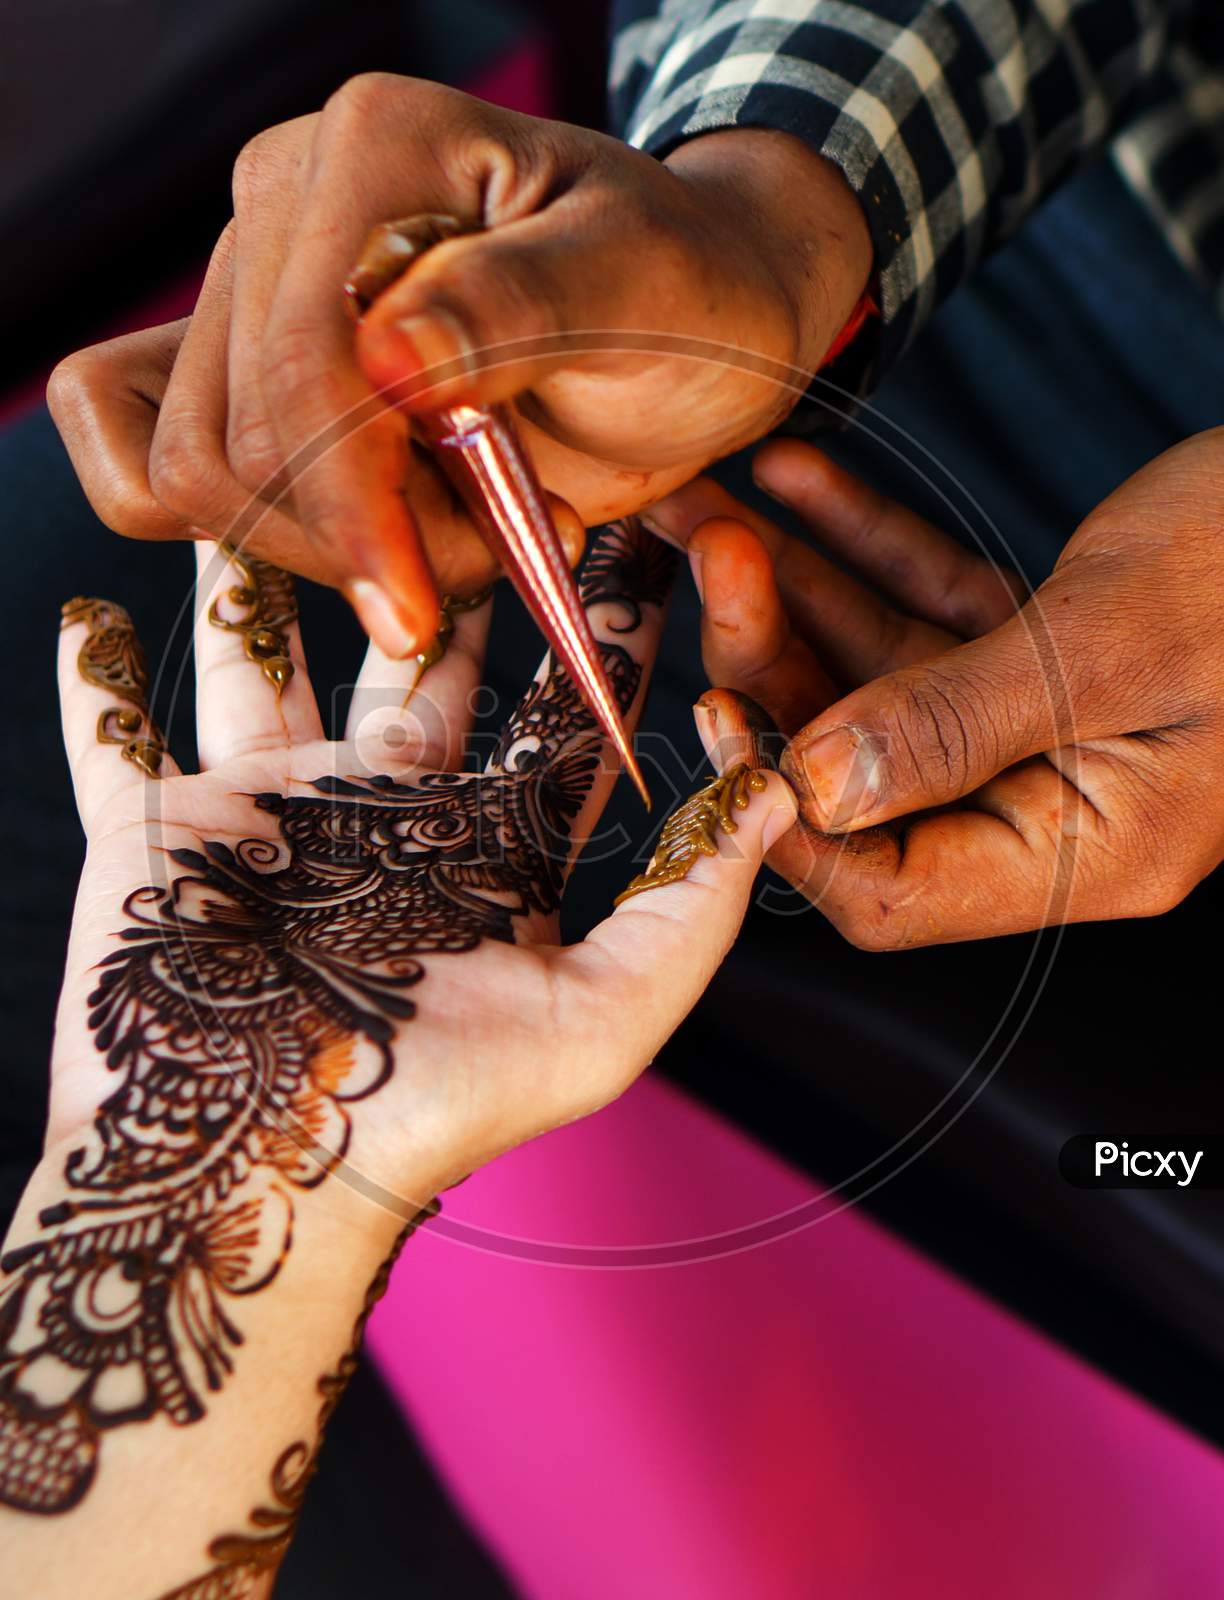 View Of Artist Drawing Indian Henna Or Herbal Way Of Traditional Temporary Tattooing On A Womans Hand